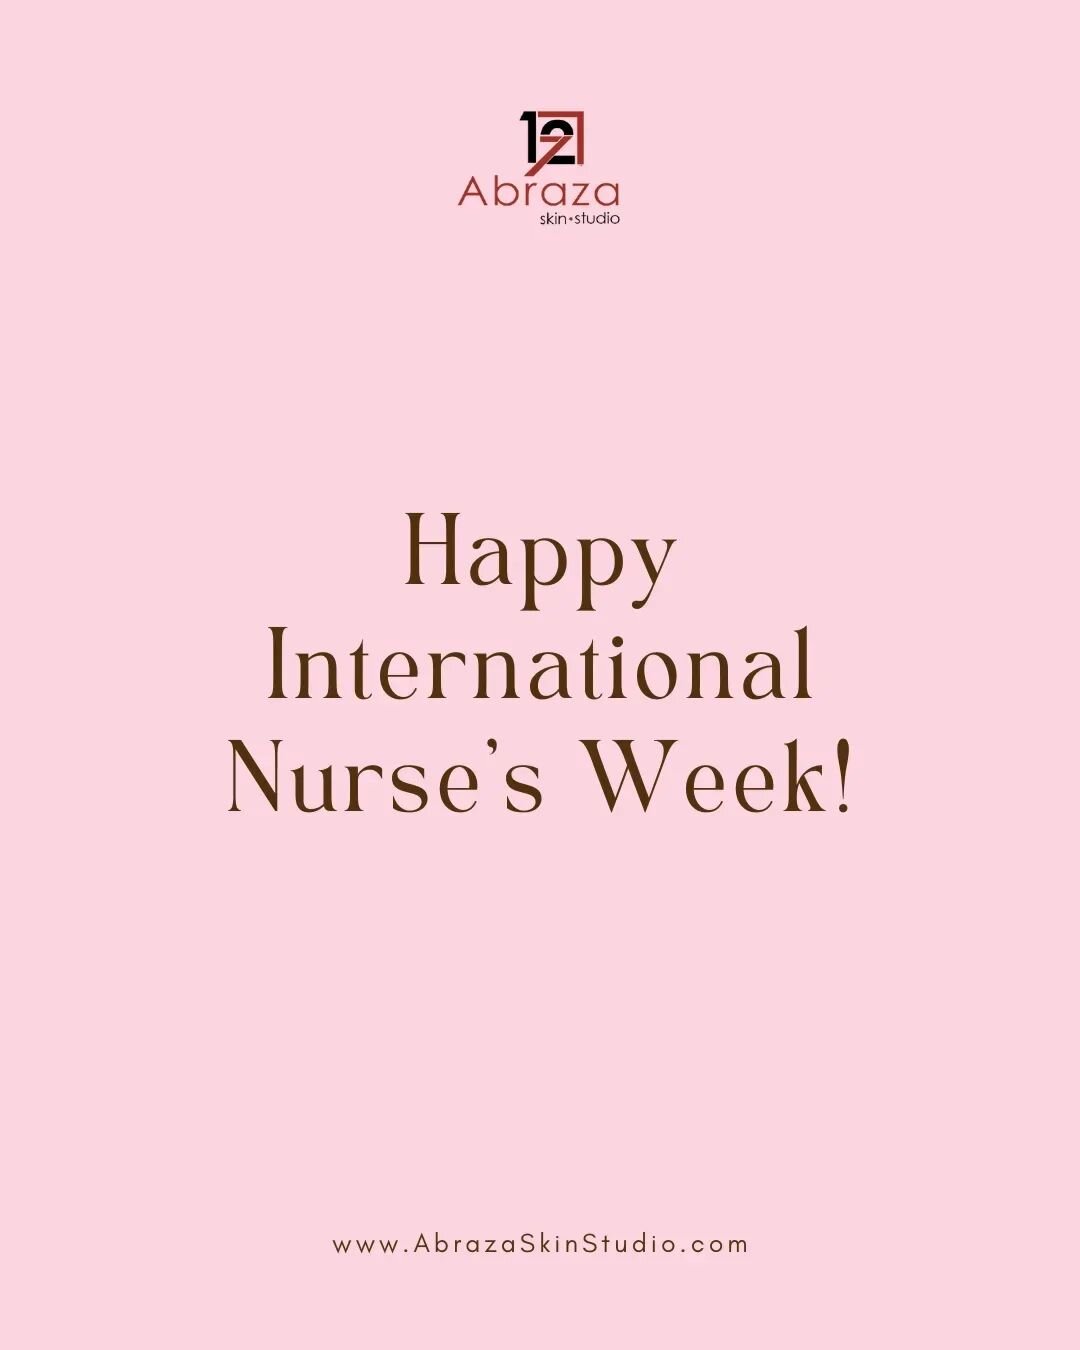 We want to celebrate and thank all the incredible nurses who have dedicated their lives to helping others. ❤️

As a special offer, we are giving $50 off on any regular-priced treatments at Abraza Skin Studio to all nurses until the end of May. Must s